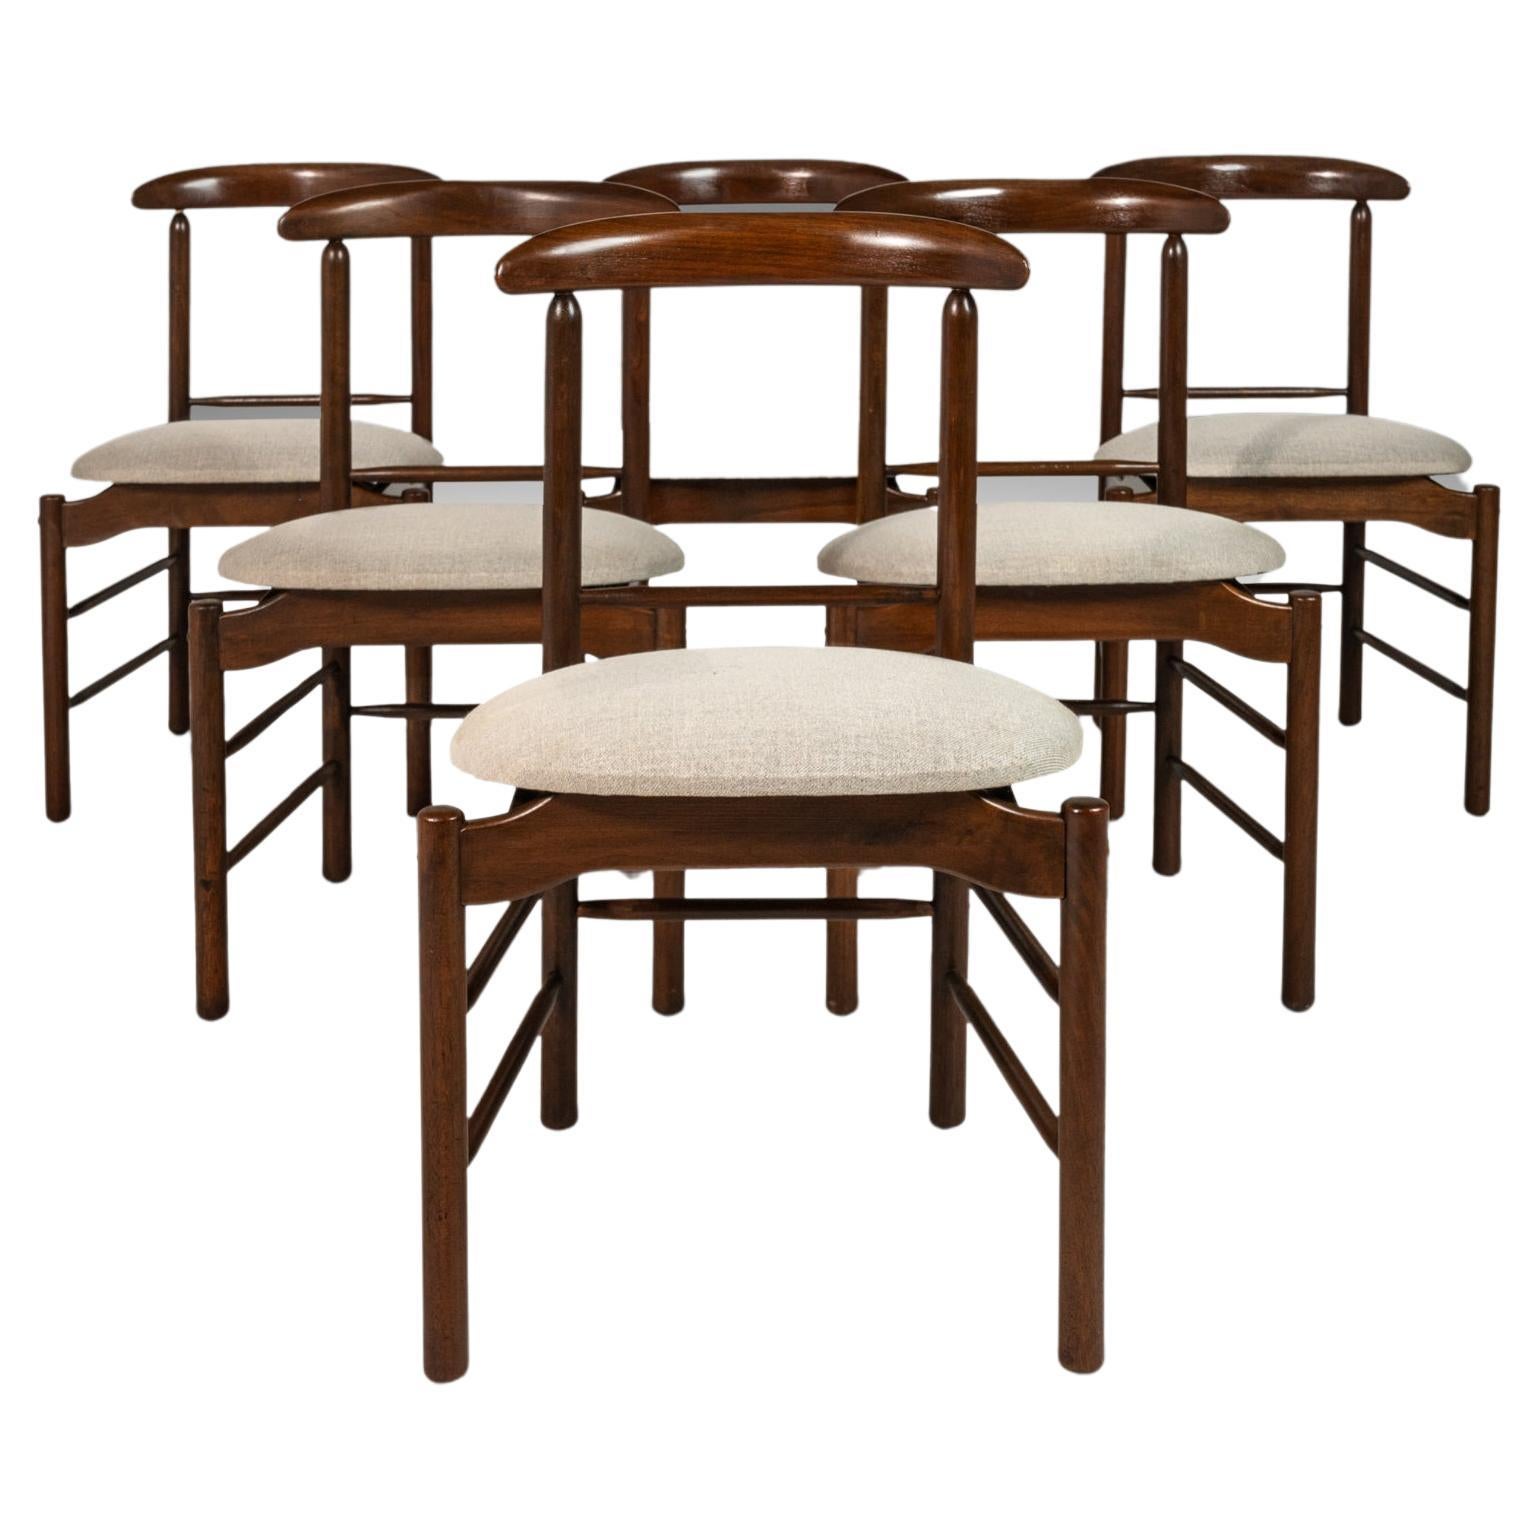 Set of Six '6' Dining Chairs by Greta Grossman for Glenn of California, c. 1954 For Sale